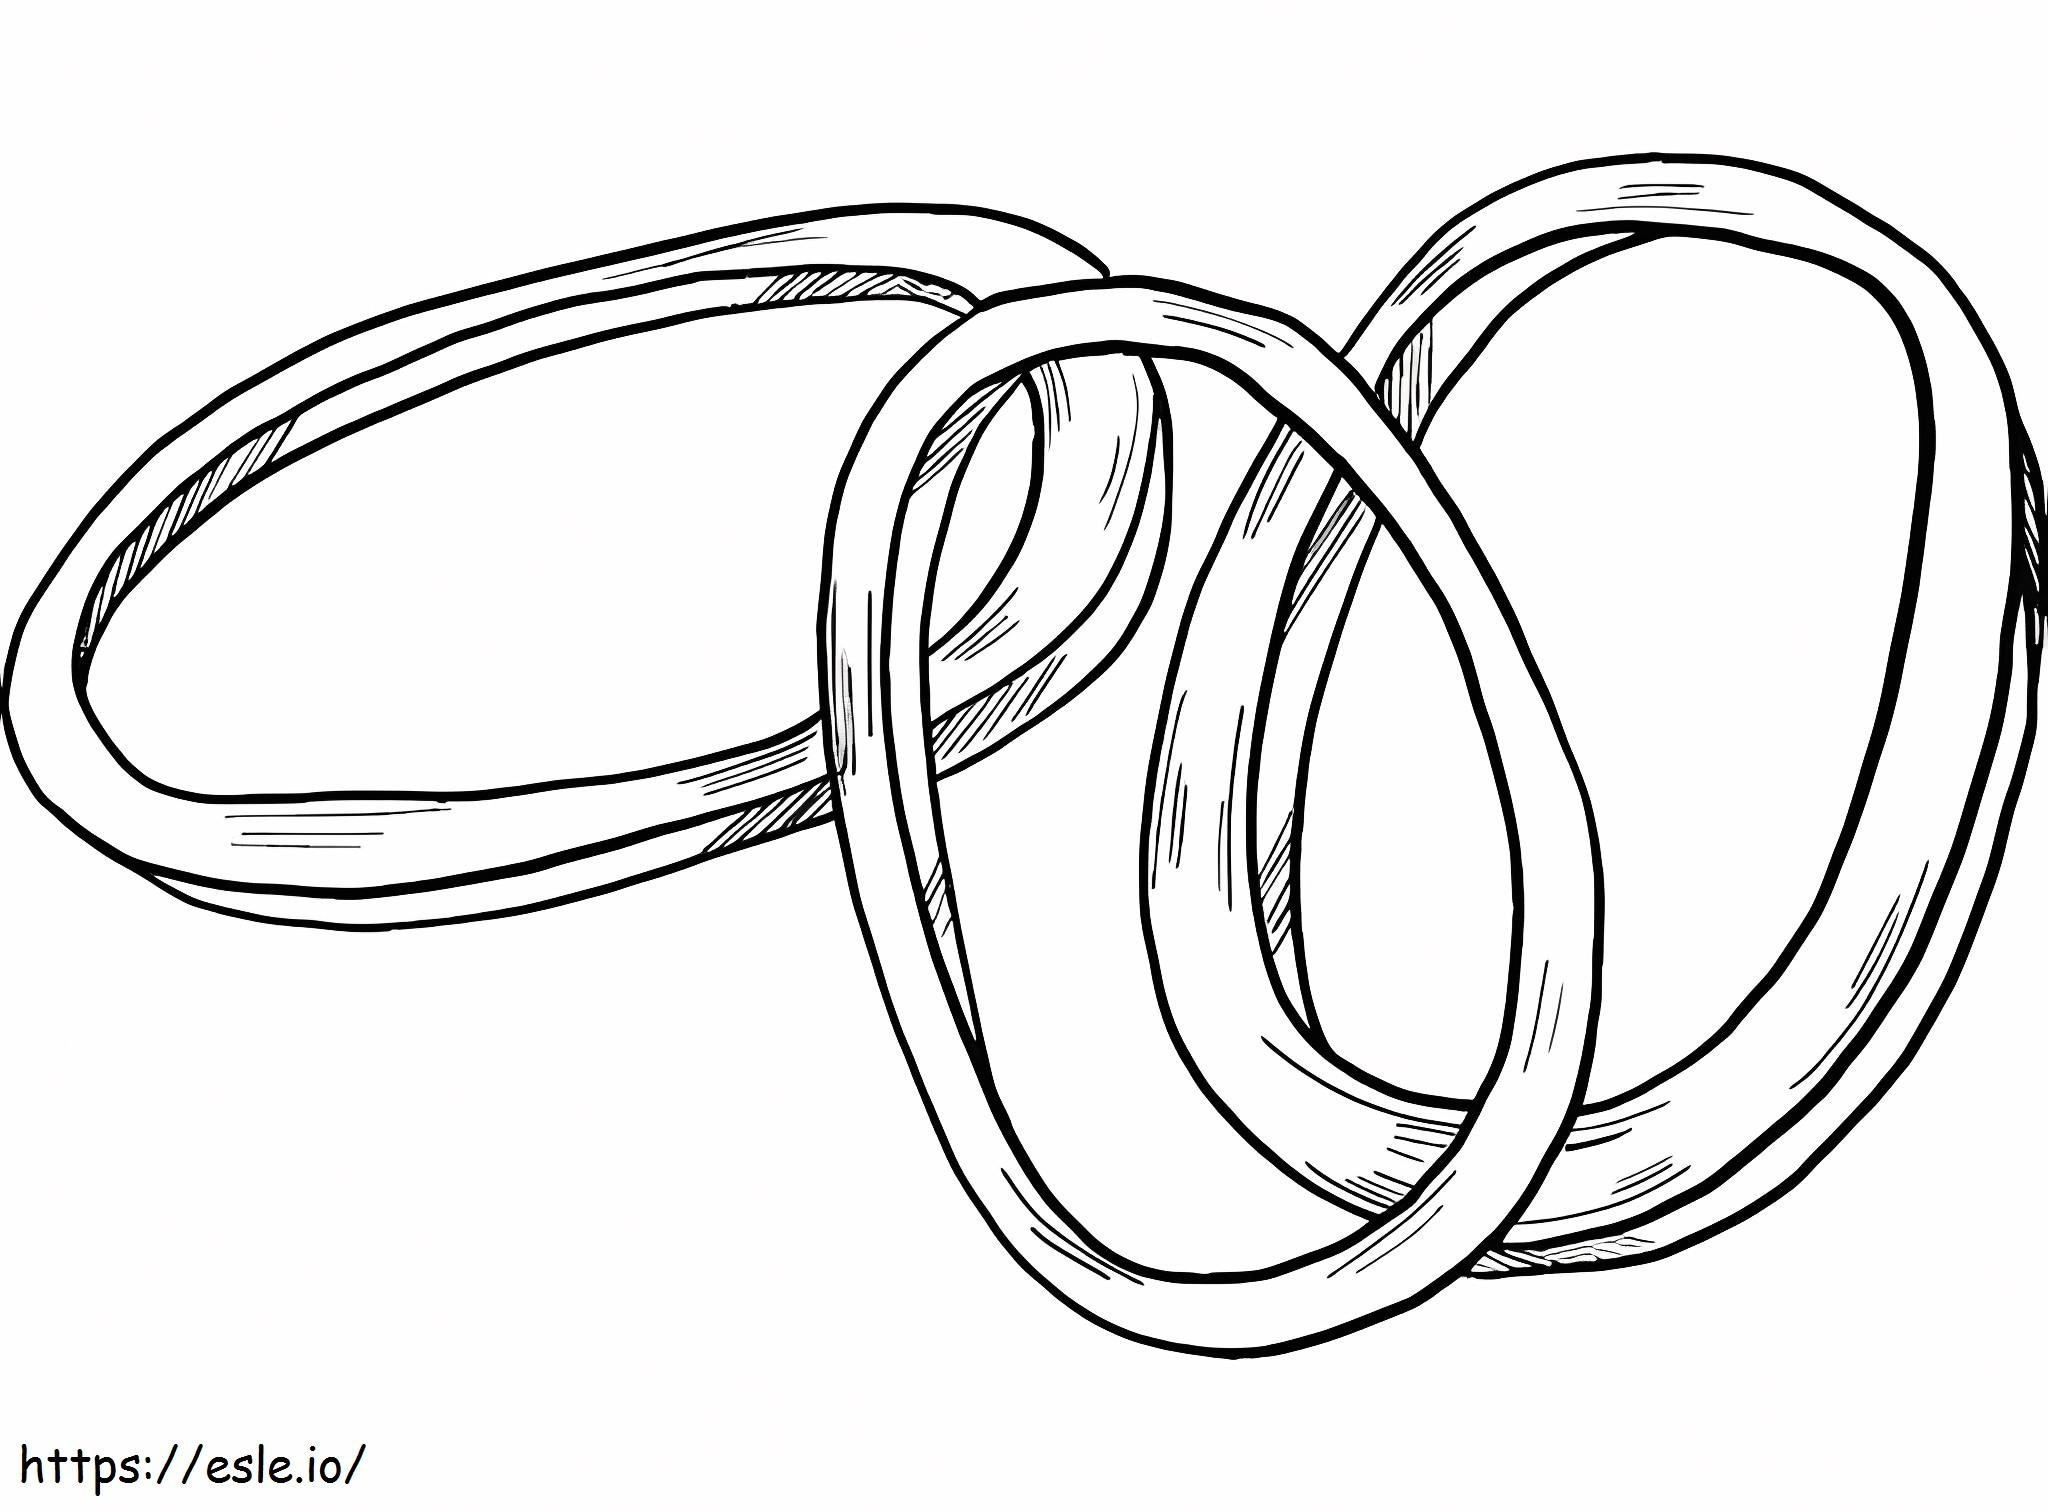 Onion Rings coloring page